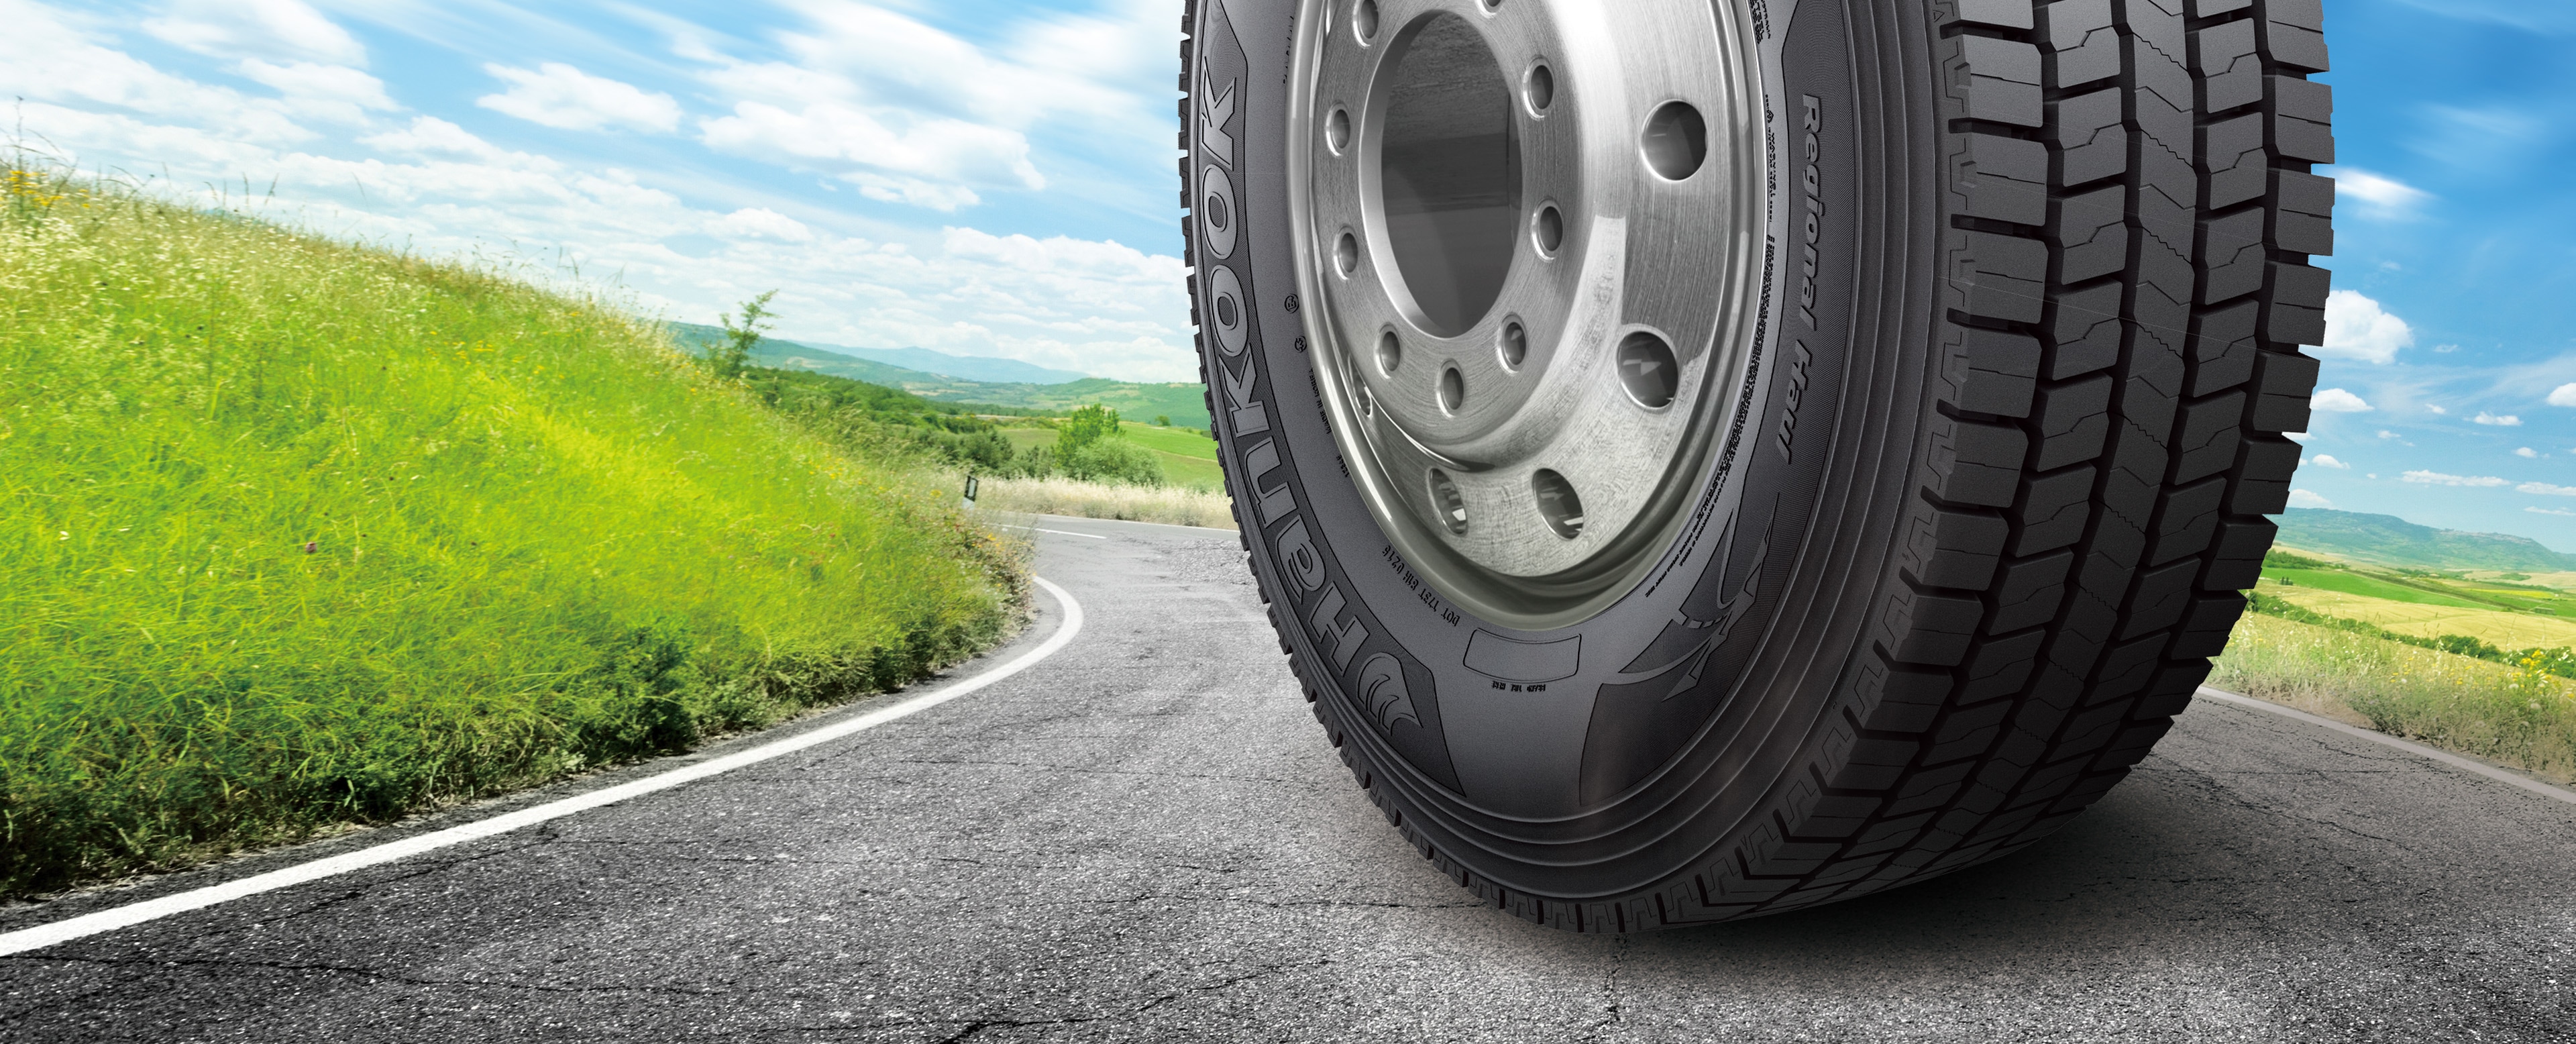 Hankook Tire & Technology-Tires-Smart-DH37-Regional haul drive tire for extrame mileage & traction